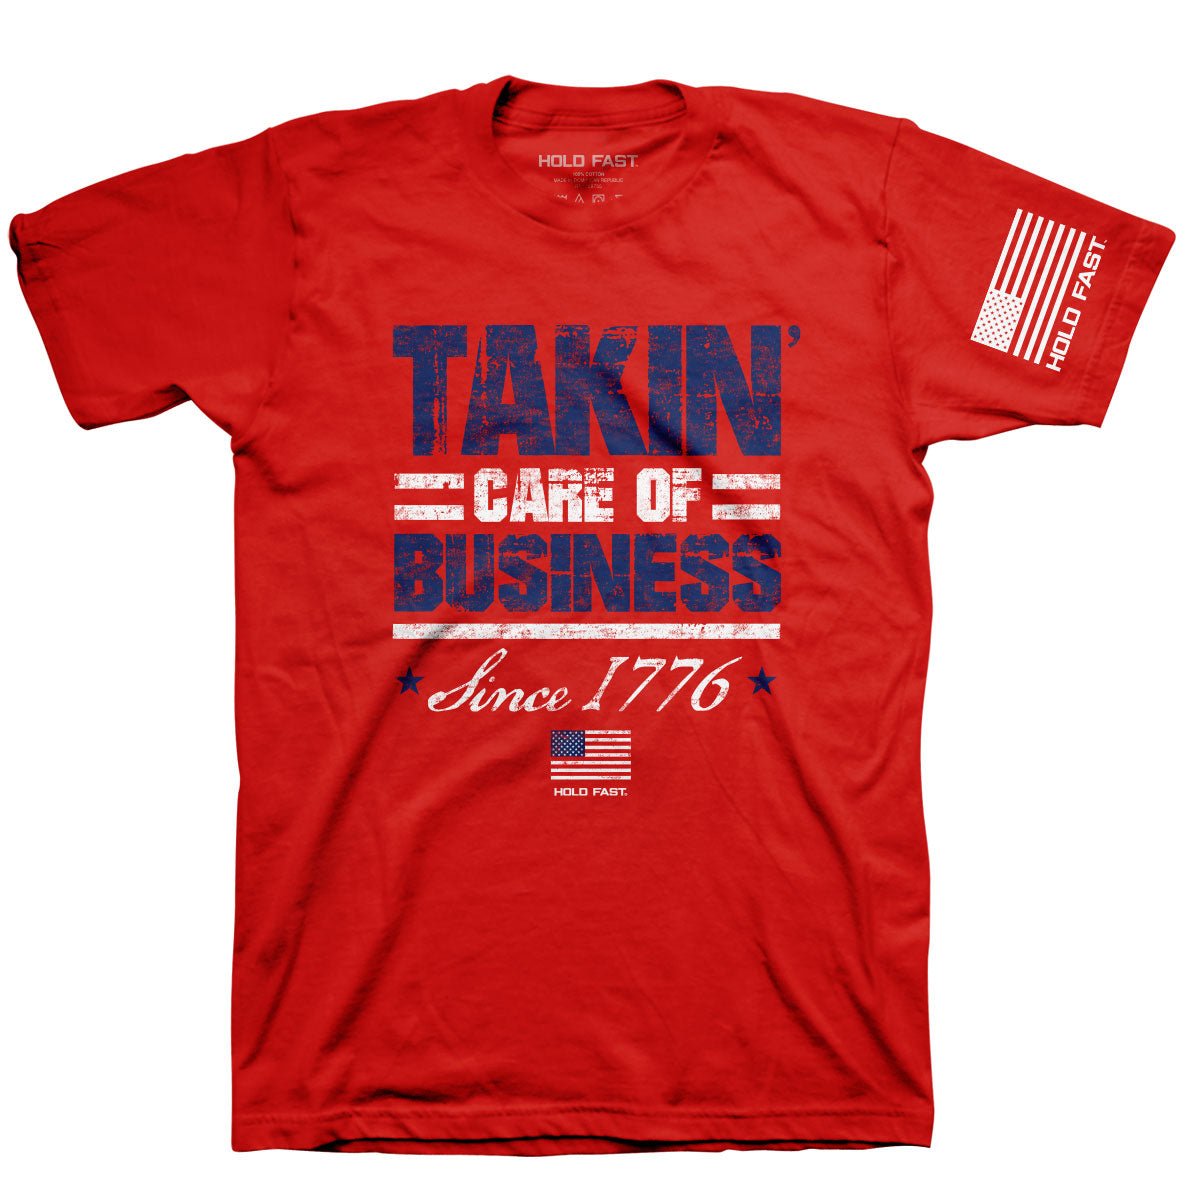 HOLD FAST Mens T-Shirt Takin' Care Of Business | 2FruitBearers